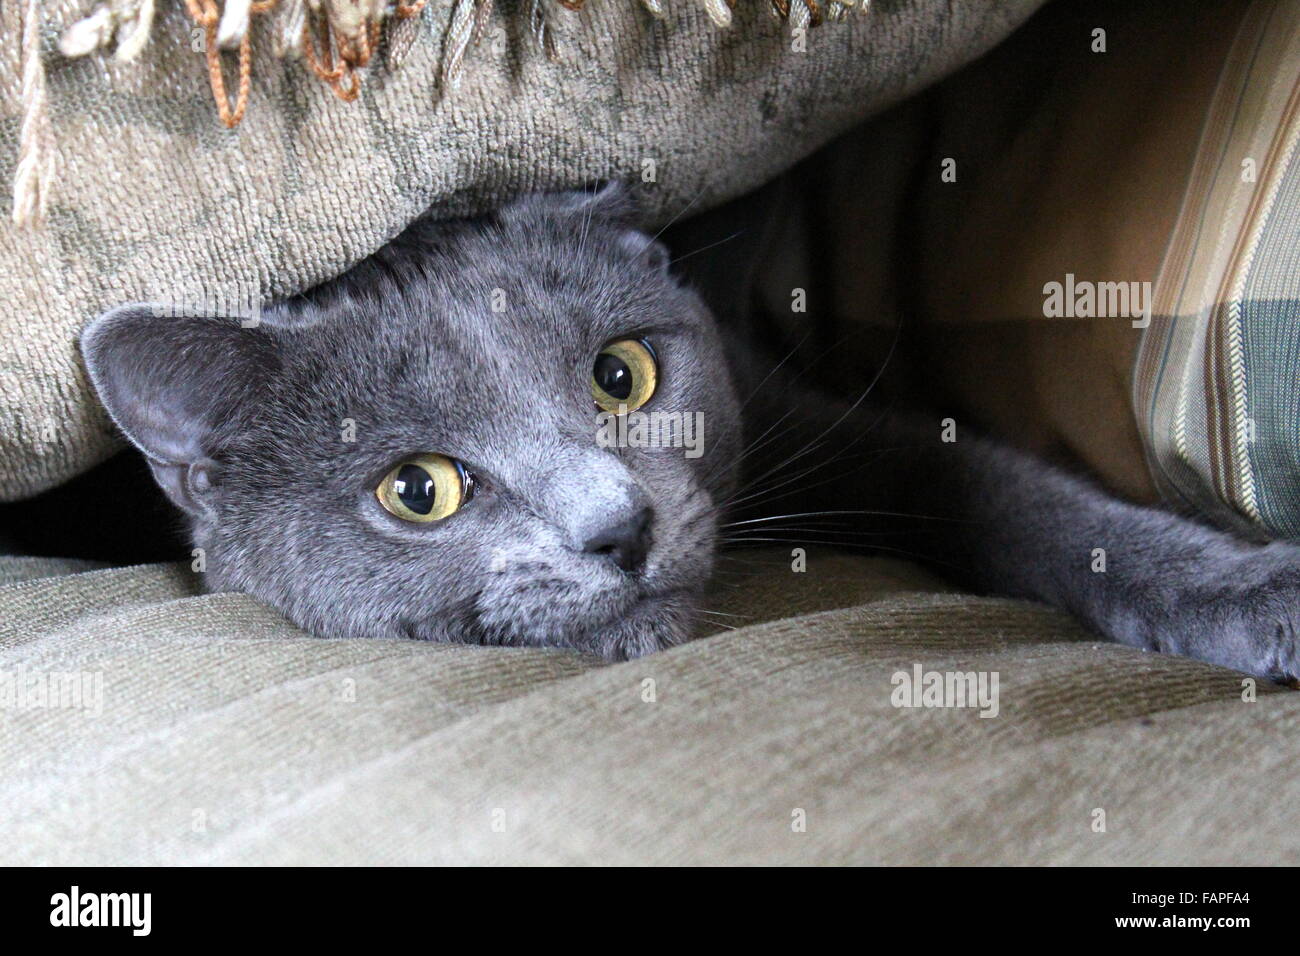 Comical image of an inquisitive, playful gray cat with bright green eyes, peeking out from under pillow on couch. Stock Photo